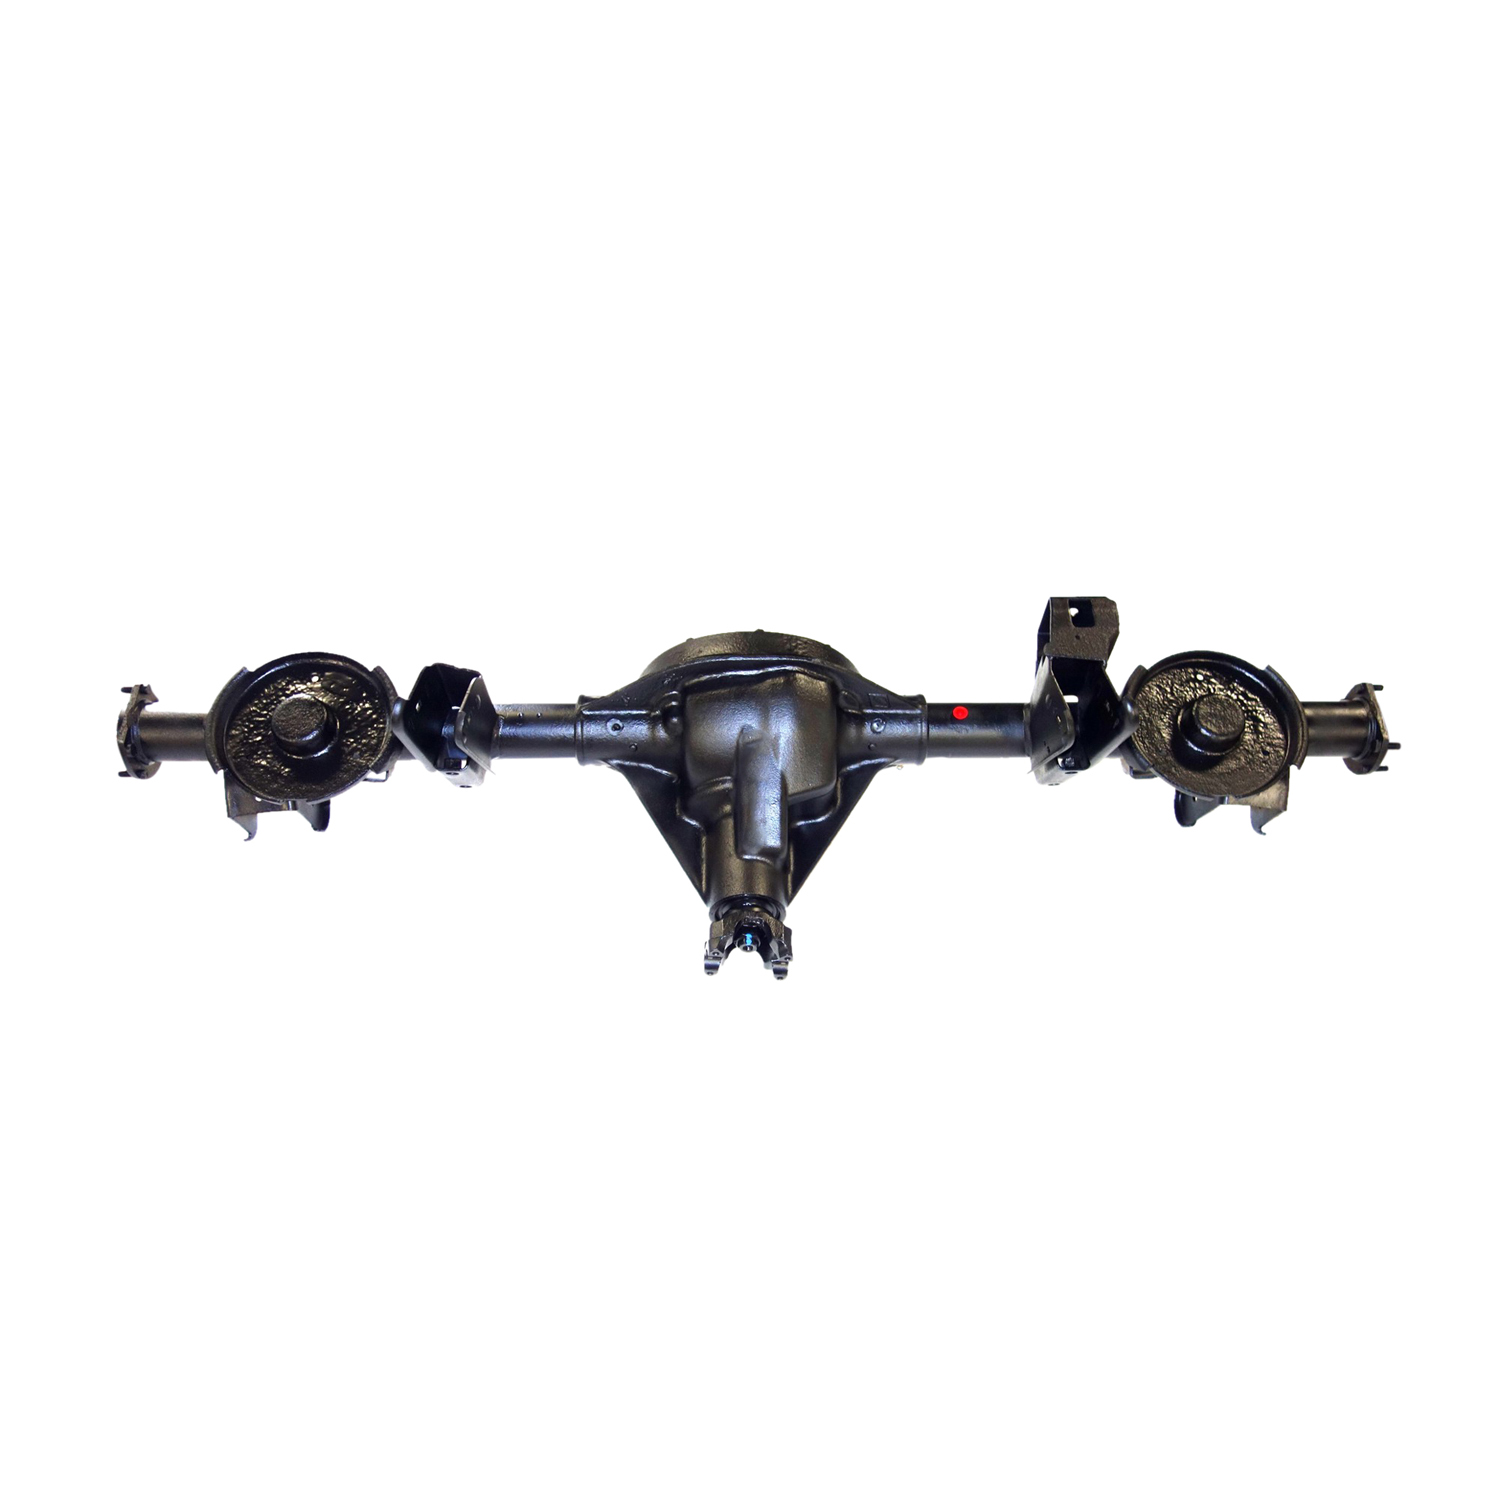 Remanufactured Rear Axle Assy D35 1997-2002 Wrangler 3.07 w/out ABS